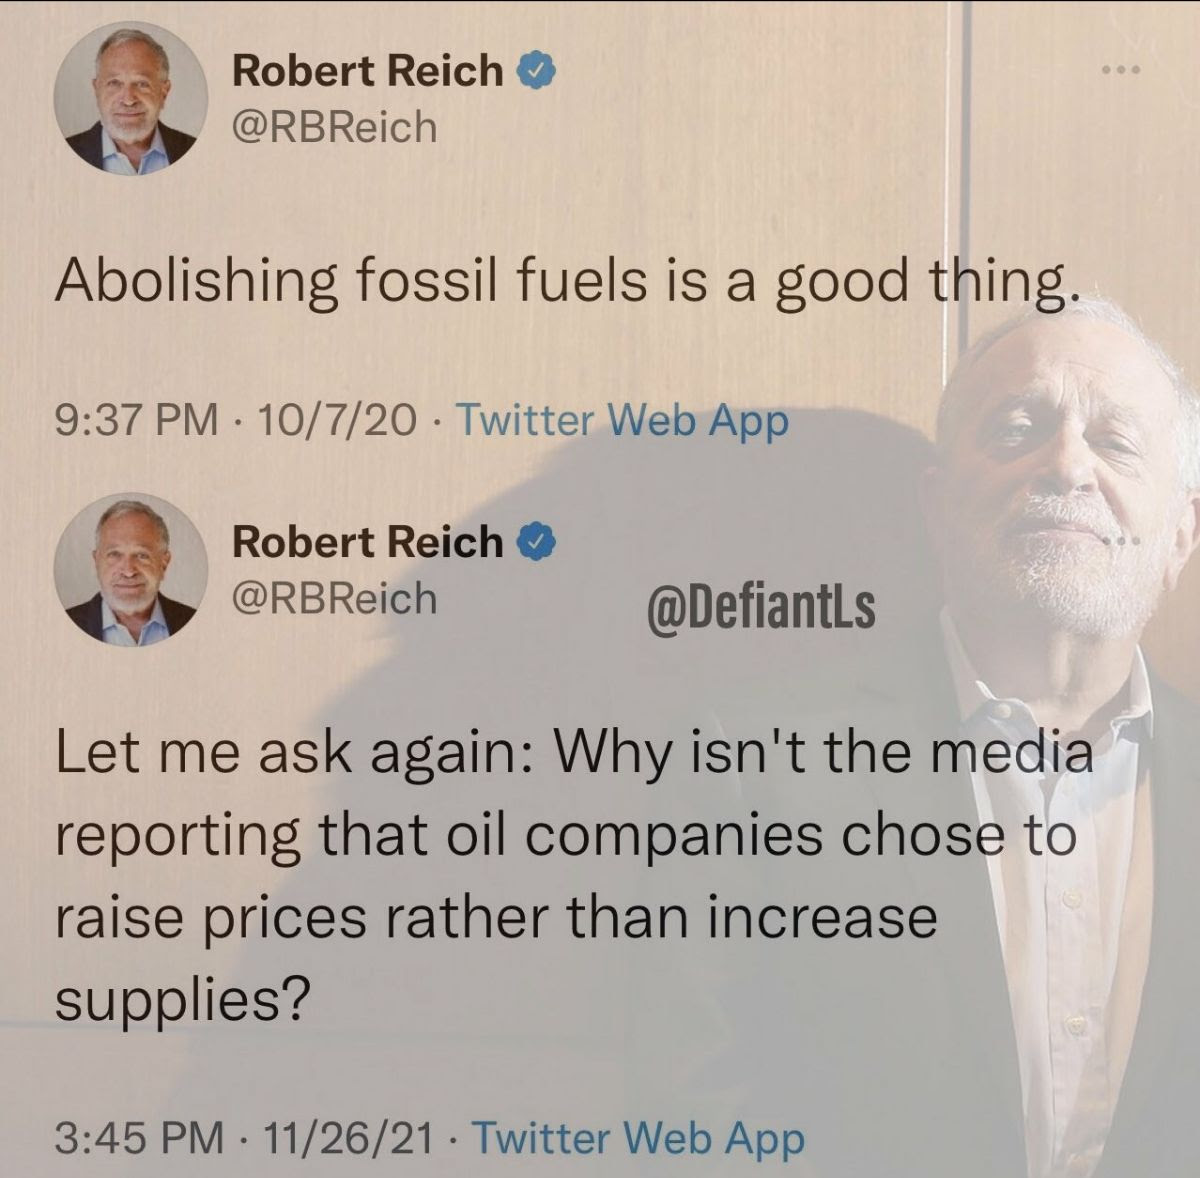 Hypocrite Robert Reich says fossil fuels should be abolished then complains about the price.